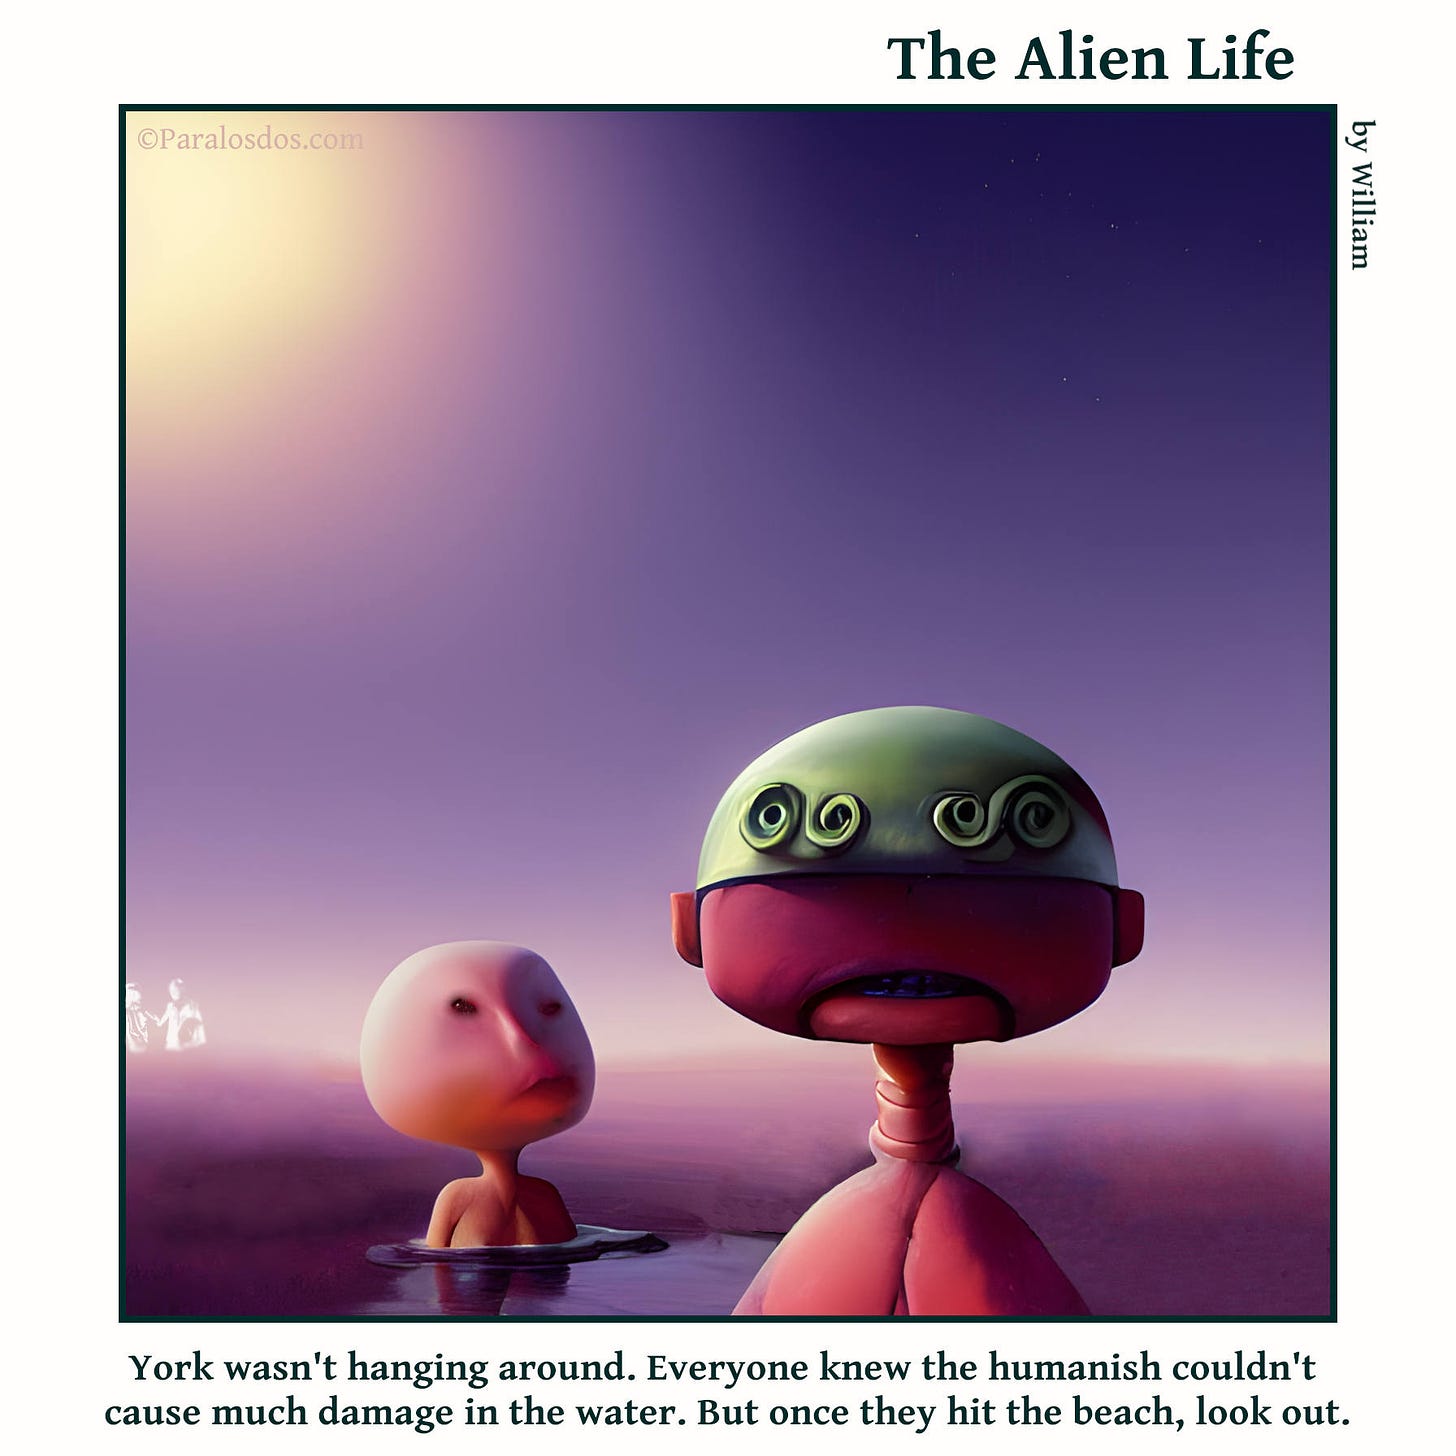 The Alien Life, one panel Comic. An alien is getting away from the ocean fast with a worried look. Behind him is a weird human looking figure emerging from the water. The caption reads: York wasn't hanging around. Everyone knew the humanish couldn't cause much damage in the water. But once they hit the beach, look out.